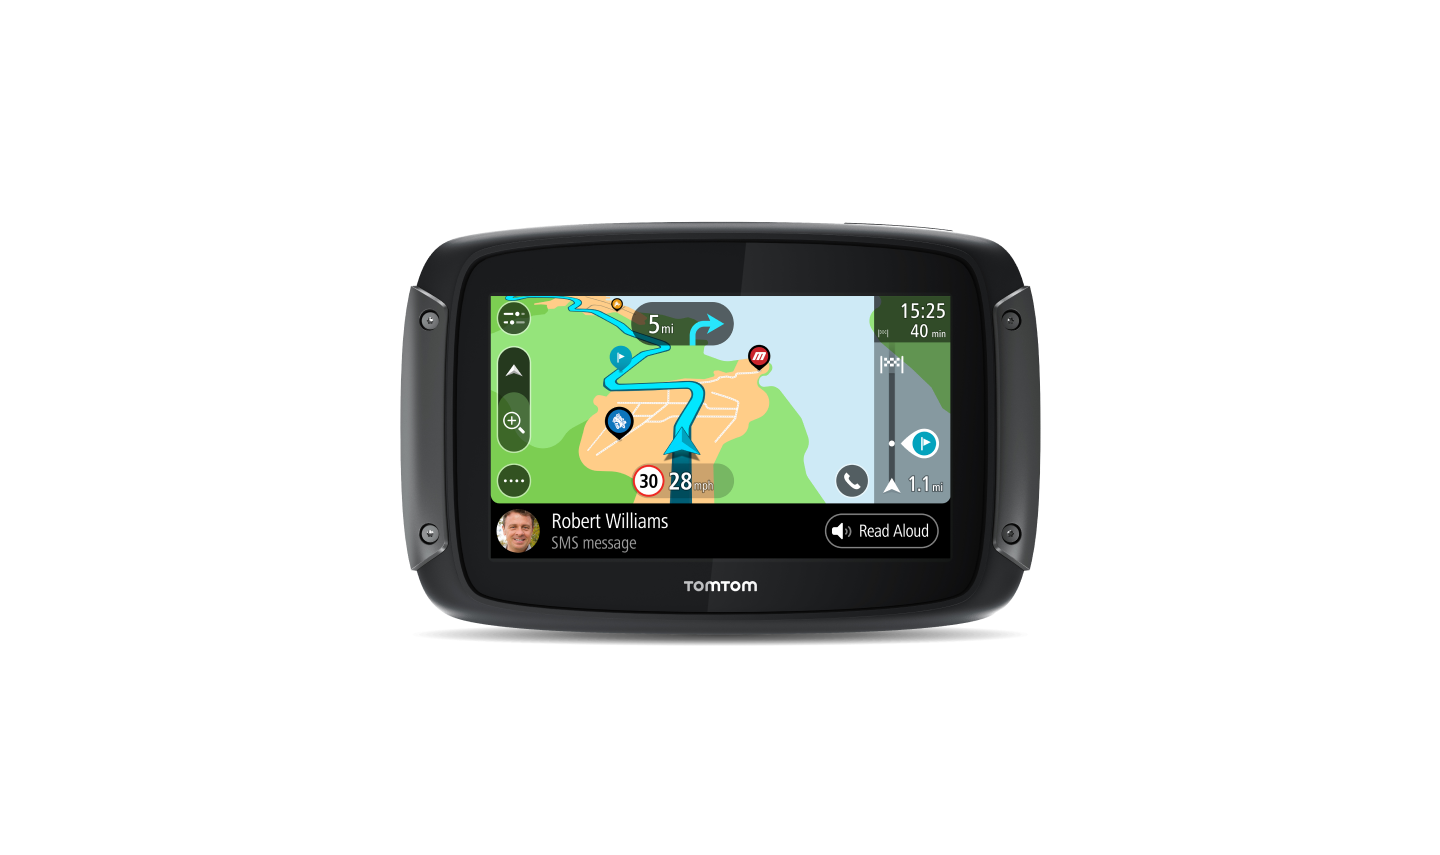 Ampère Gluren Buitenboordmotor TomTom Motorcycle GPS | Latest TomTom Rider Series for drivers